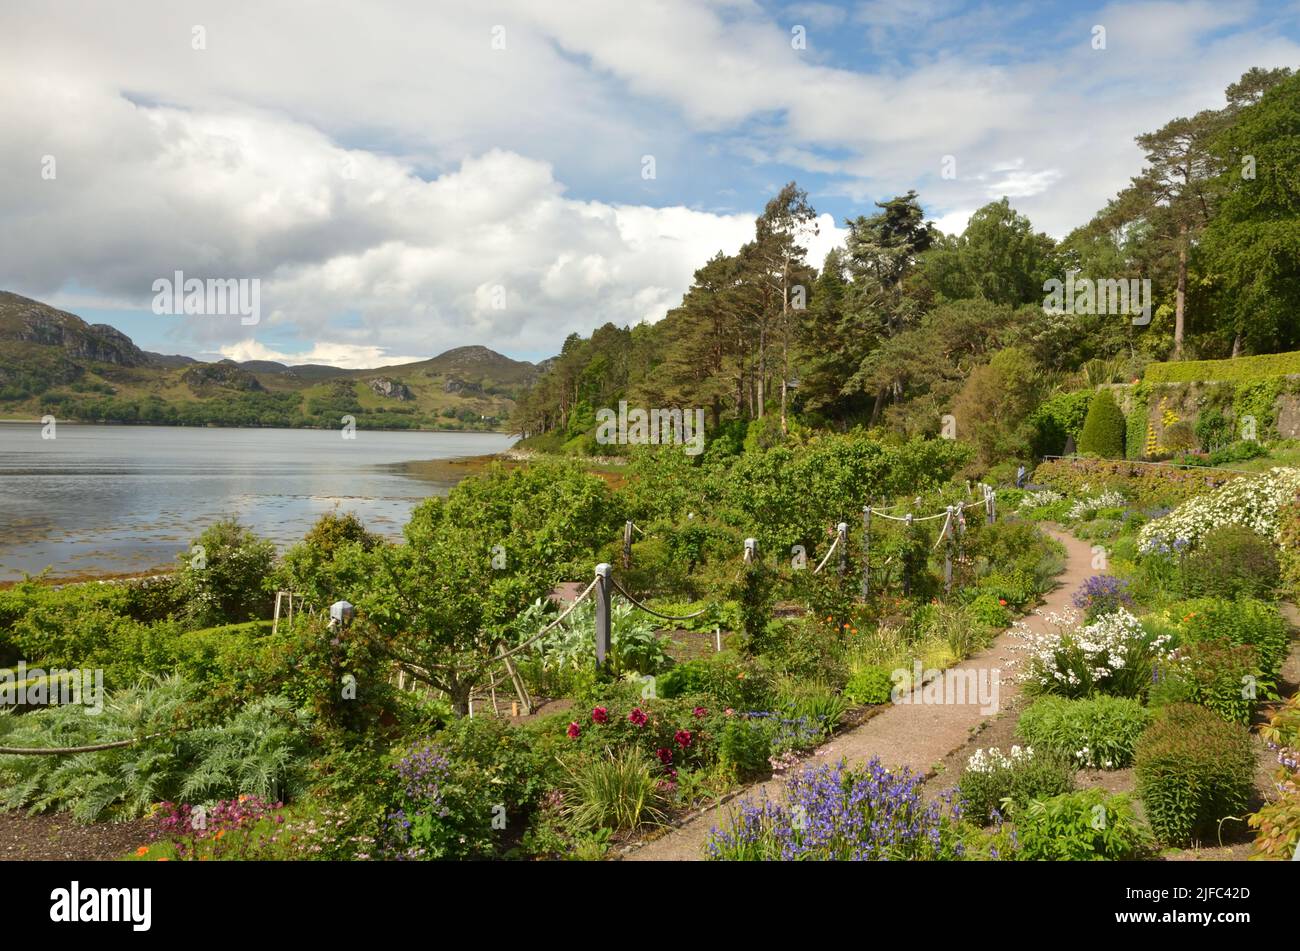 The walled garden at the National Trust for Scotland Inverewe Gardens site, near Poolewe, Scottish Highlands, UK Stock Photo